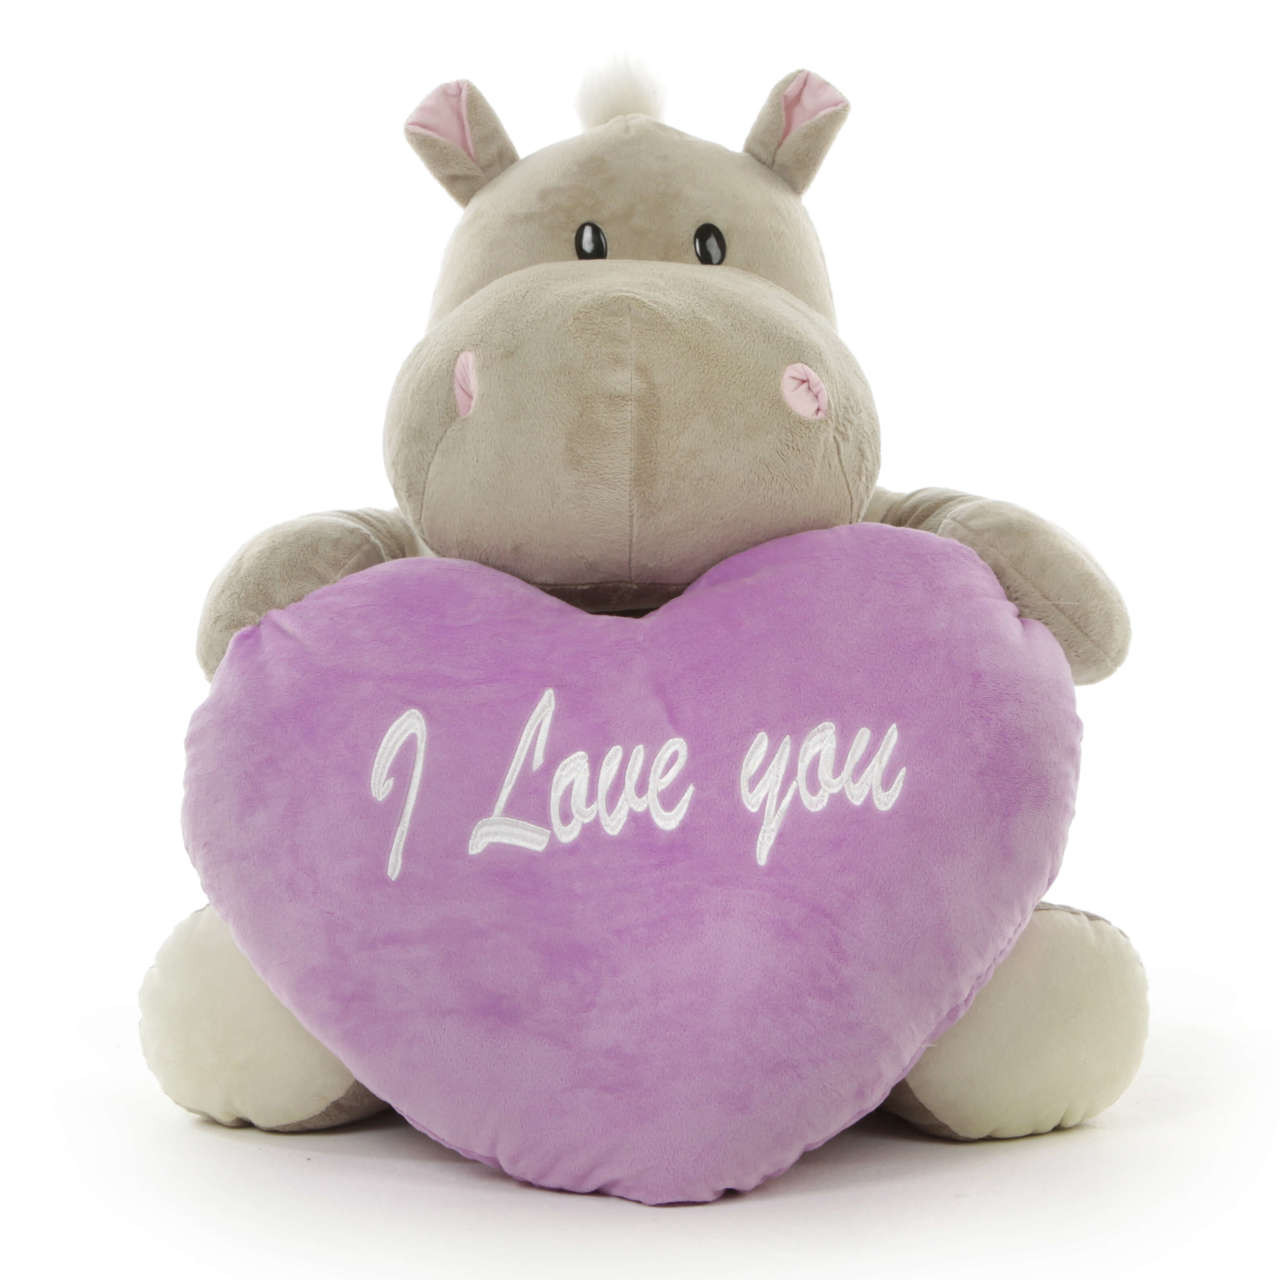 Let this sweet plush hippo be the unique Valentine's Day gift that your loved one will treasure forever!